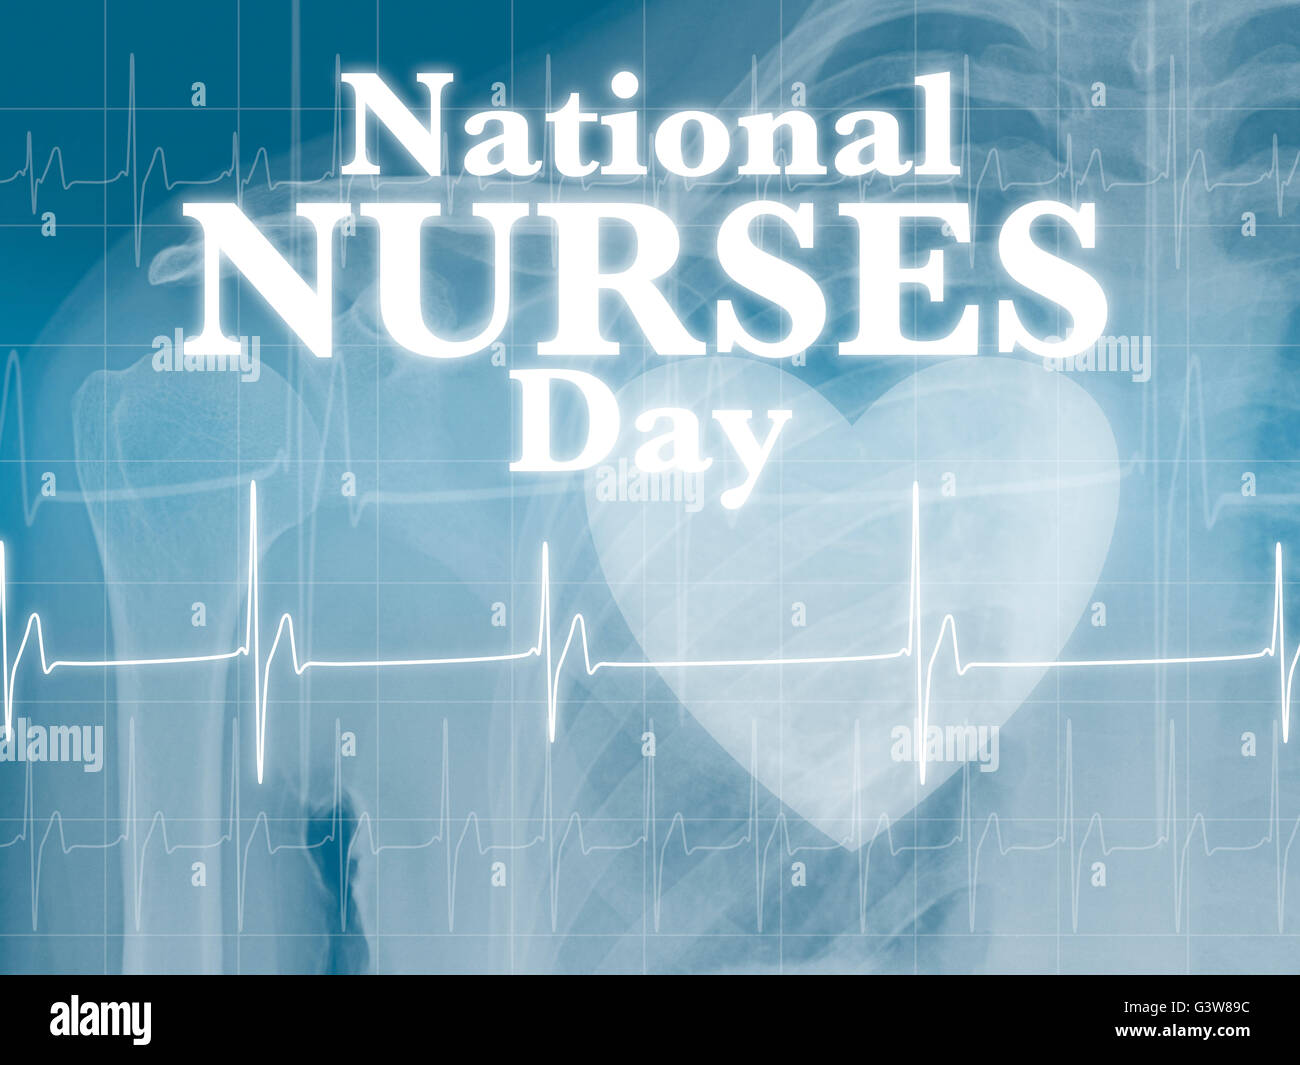 Poster for National nurse's day Stock Photo